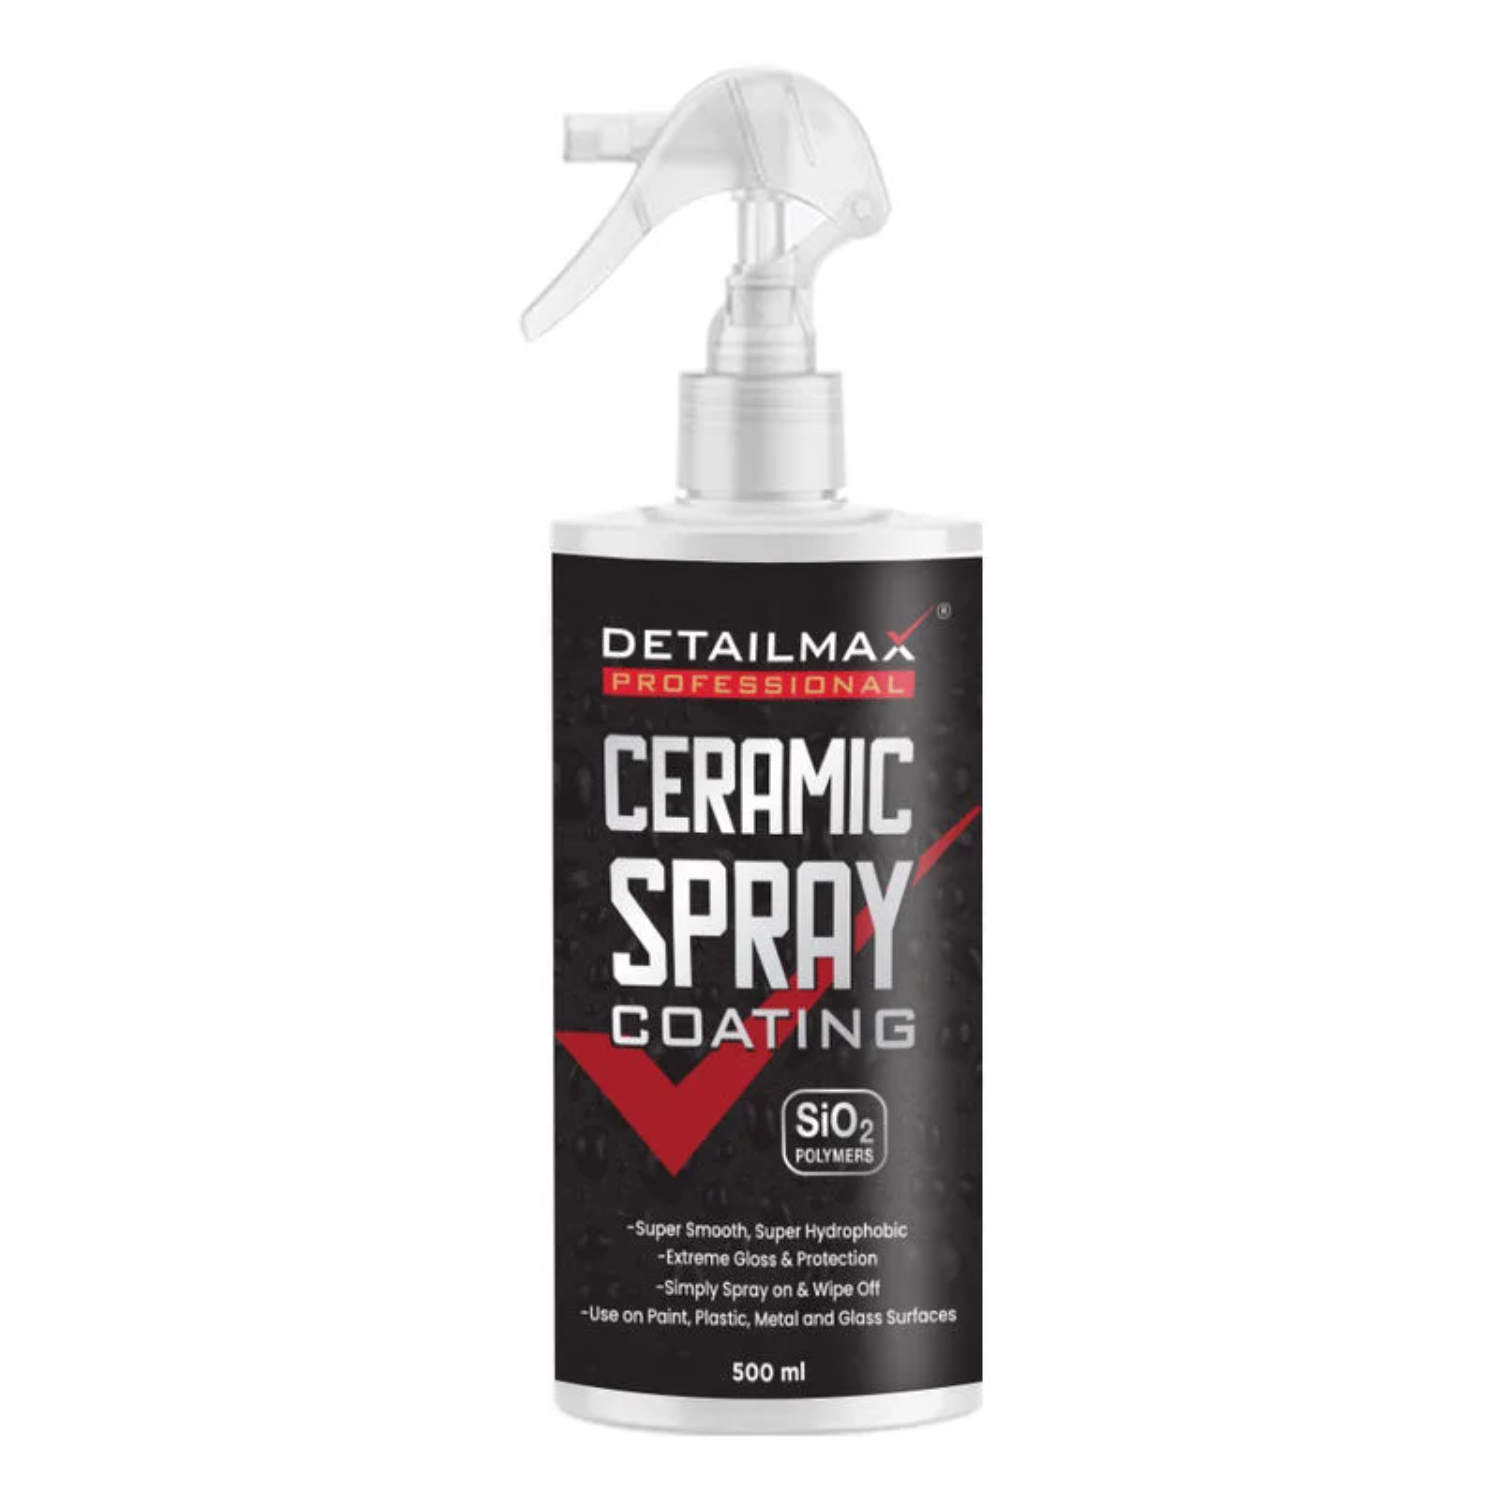 Jade Ruby Ceramic Coating Spray - 12oz - Paint Correction & Protection by Detail King